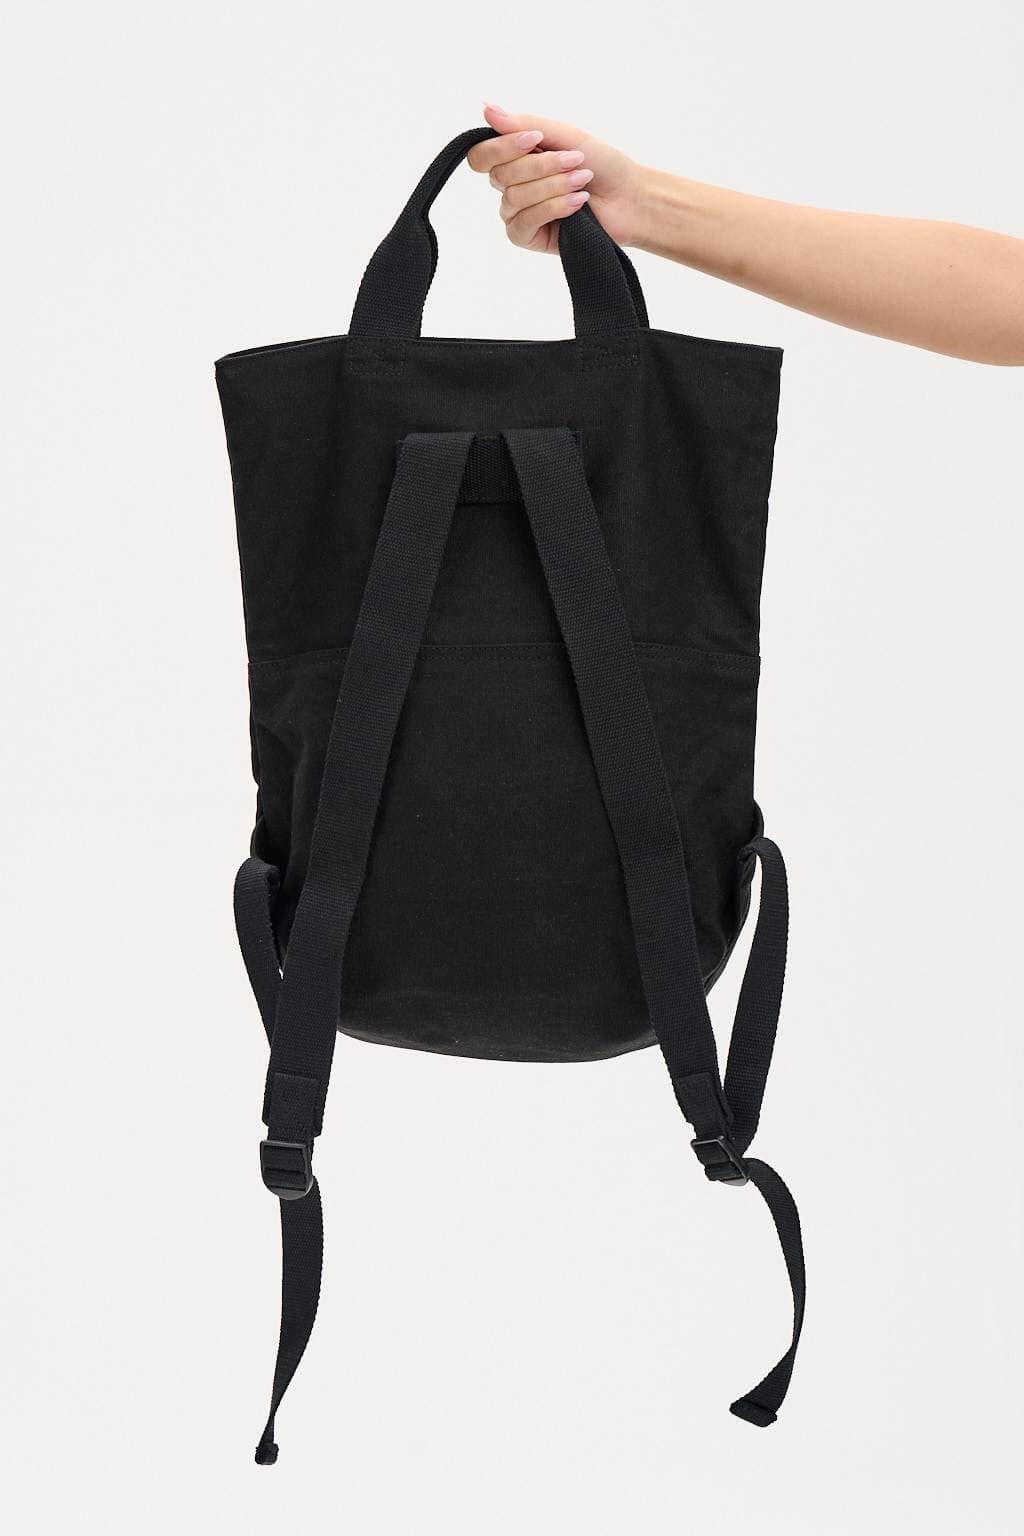 Lucy & Yak Backpack Dylan YAKpack: ORGANIC CANVAS -  Black